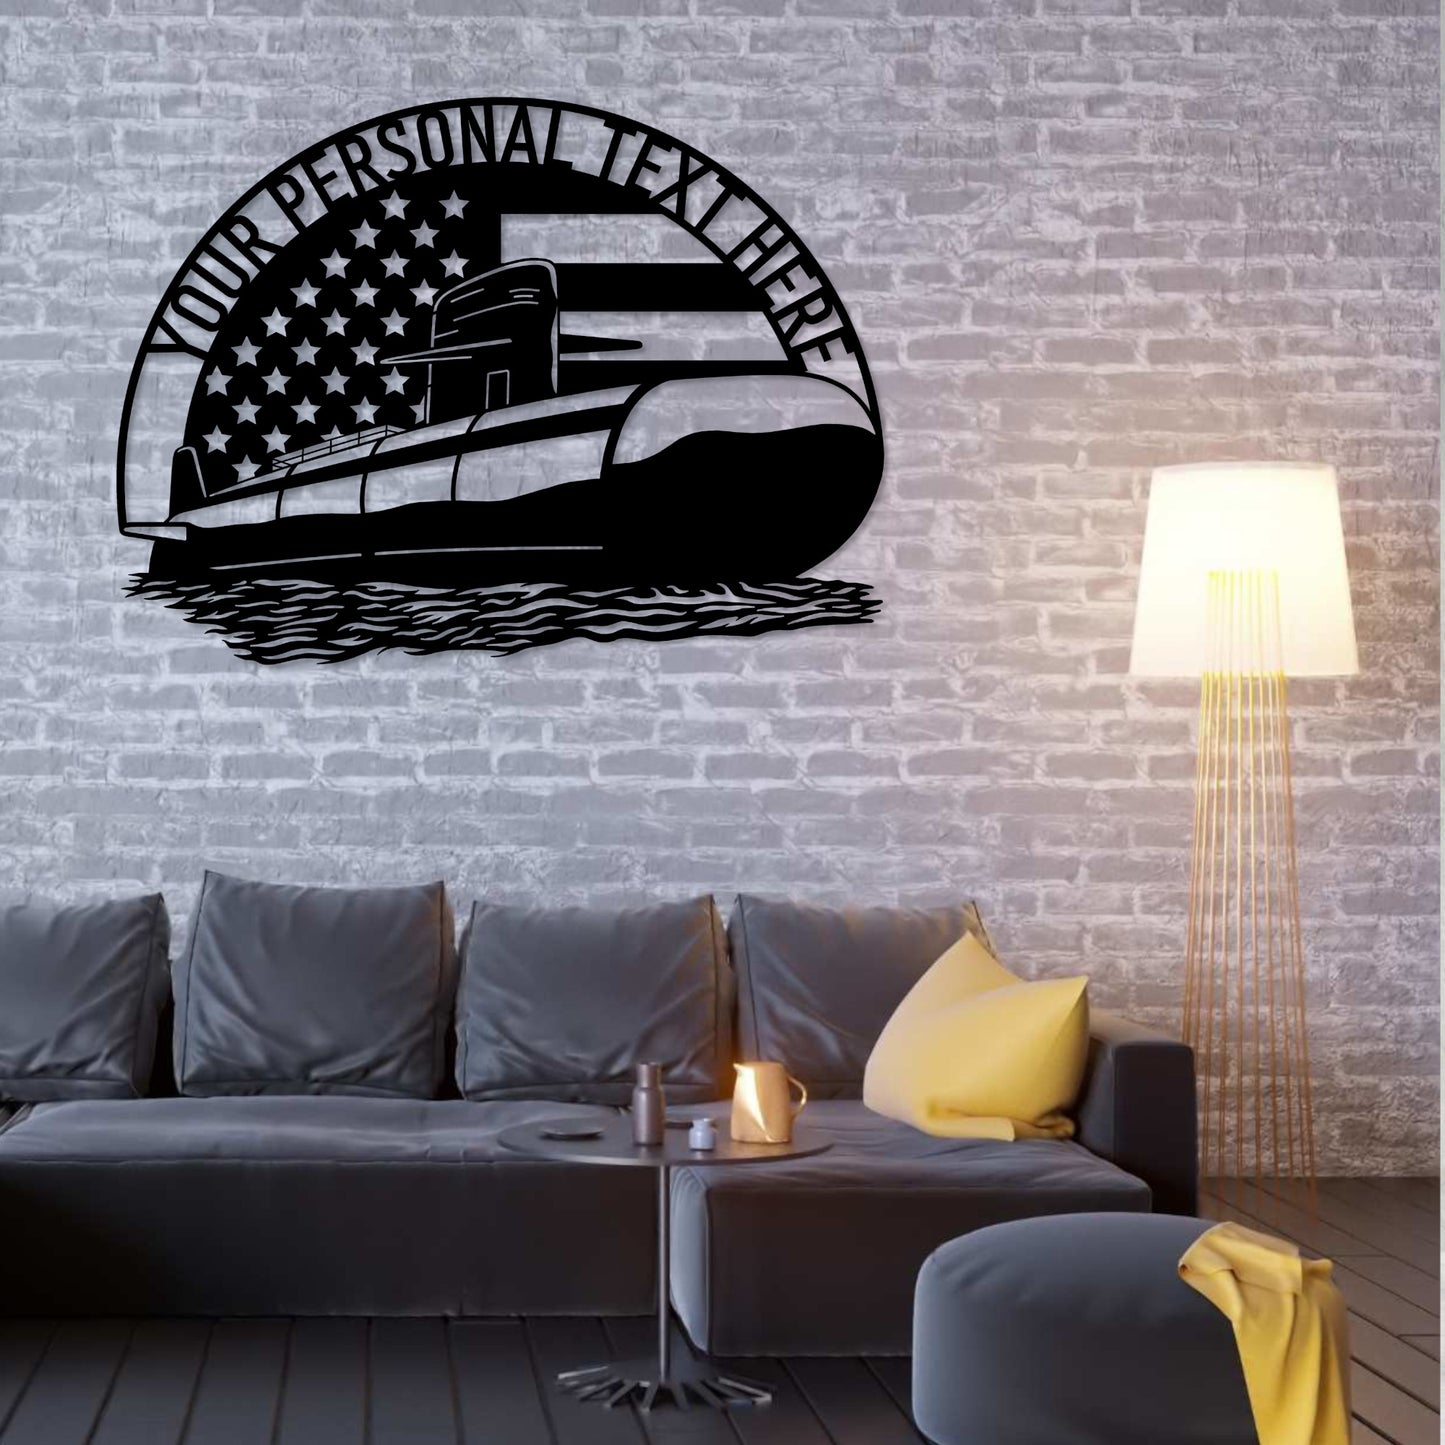 Personalized American Submarine Metal Sign. Custom Navy Wall Decor Gift. U-Boat Monogram. Military Wall Hanging. US Soldier Retirement Gift